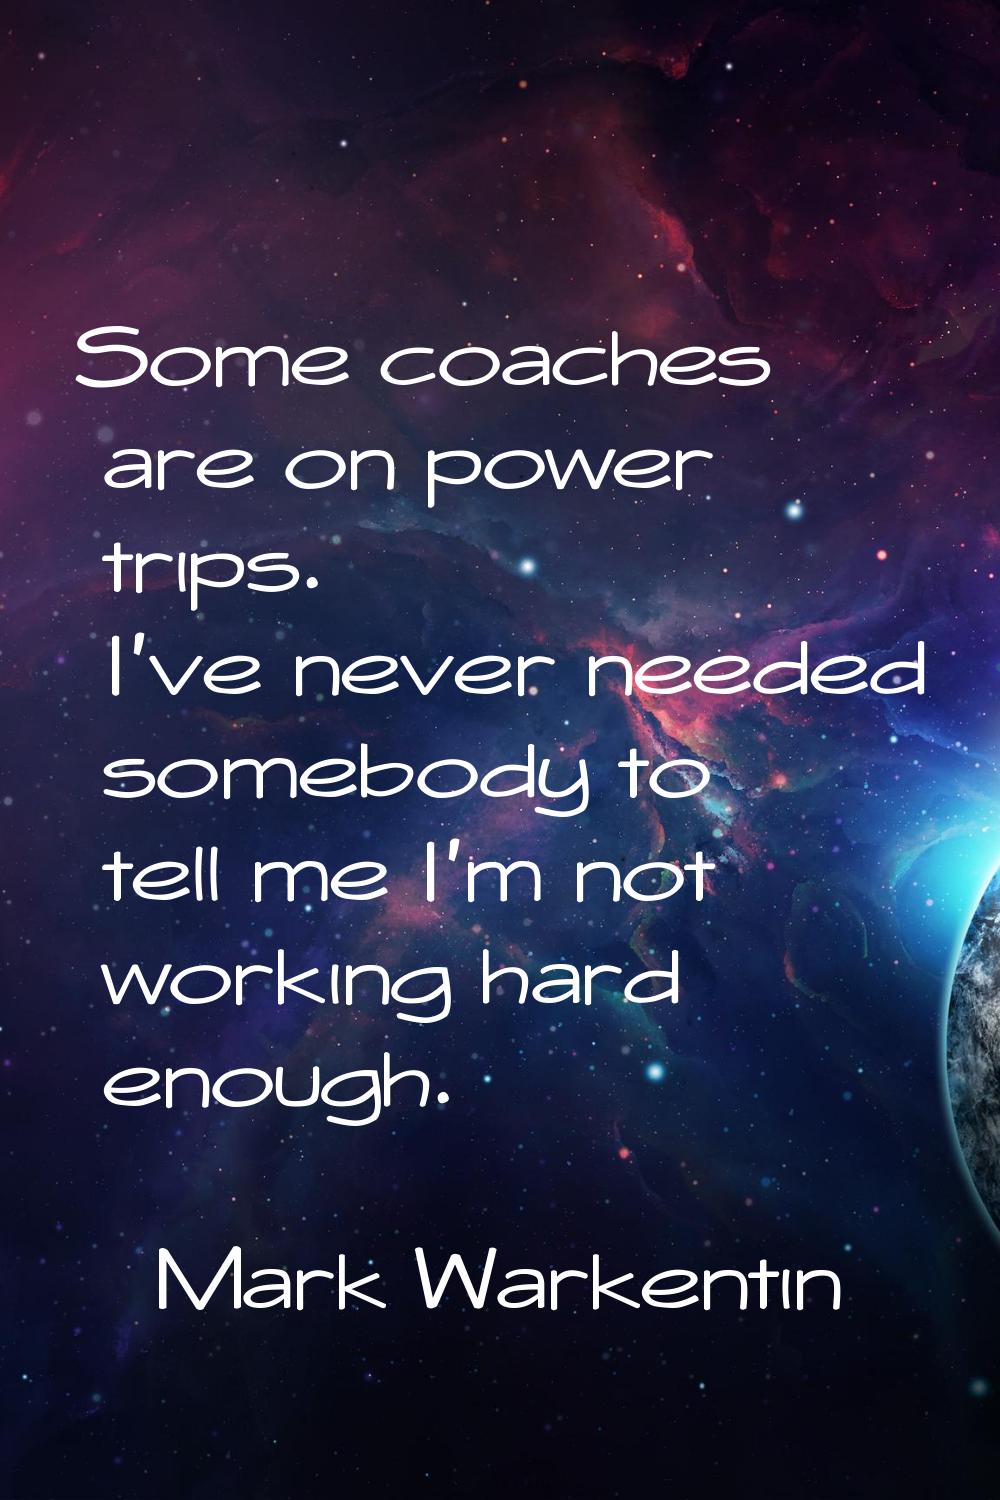 Some coaches are on power trips. I've never needed somebody to tell me I'm not working hard enough.